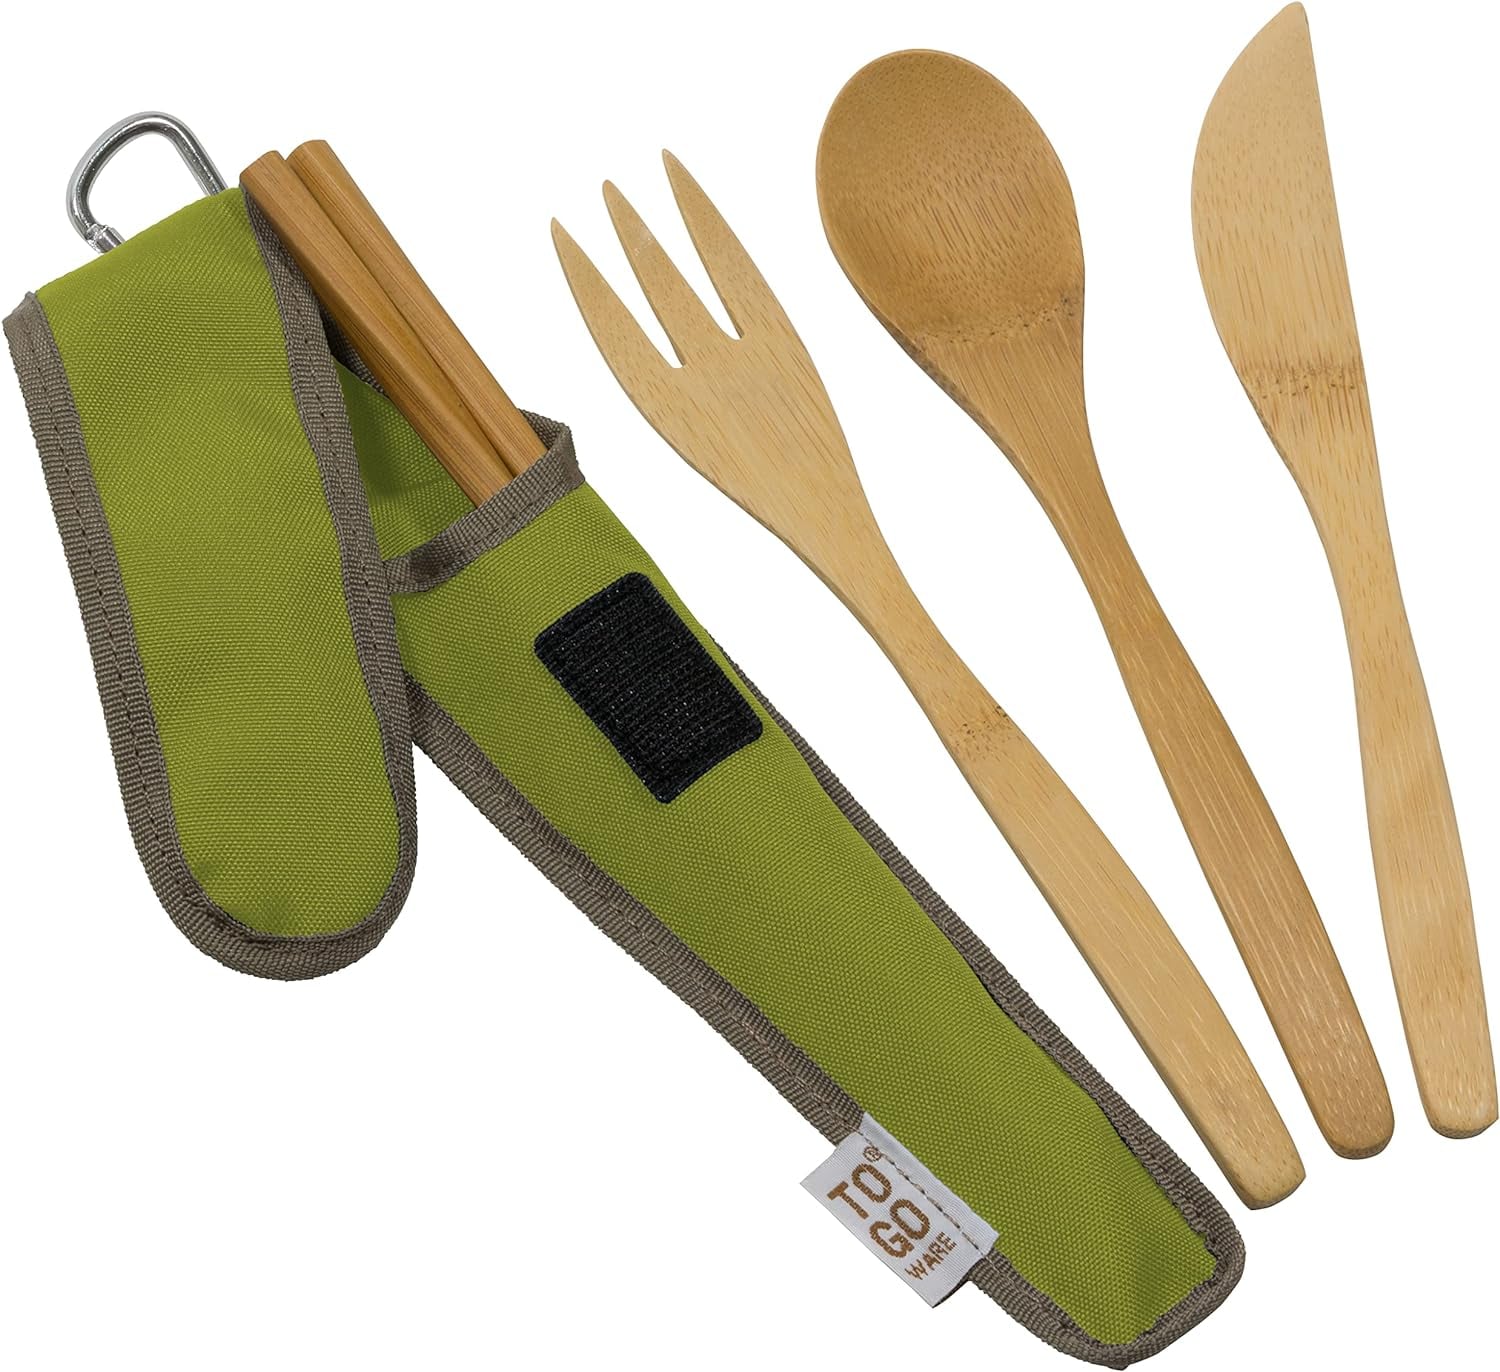 <p><a href="https://www.amazon.com/Bamboo-Travel-Utensils-Go-705105479308/dp/B002BFUPUM/?th=1">BUY NOW</a></p><p>$14</p><p><a href="https://www.amazon.com/Bamboo-Travel-Utensils-Go-705105479308/dp/B002BFUPUM/?th=1" class="ga-track"><strong>To Go Ware Bamboo Travel Utensils</strong></a> ($14)</p> <p>Being on the road doesn't mean you can't eat! These travel utensils are reusable so that your car can stay extra clean without all of the excess waste and trash. </p>